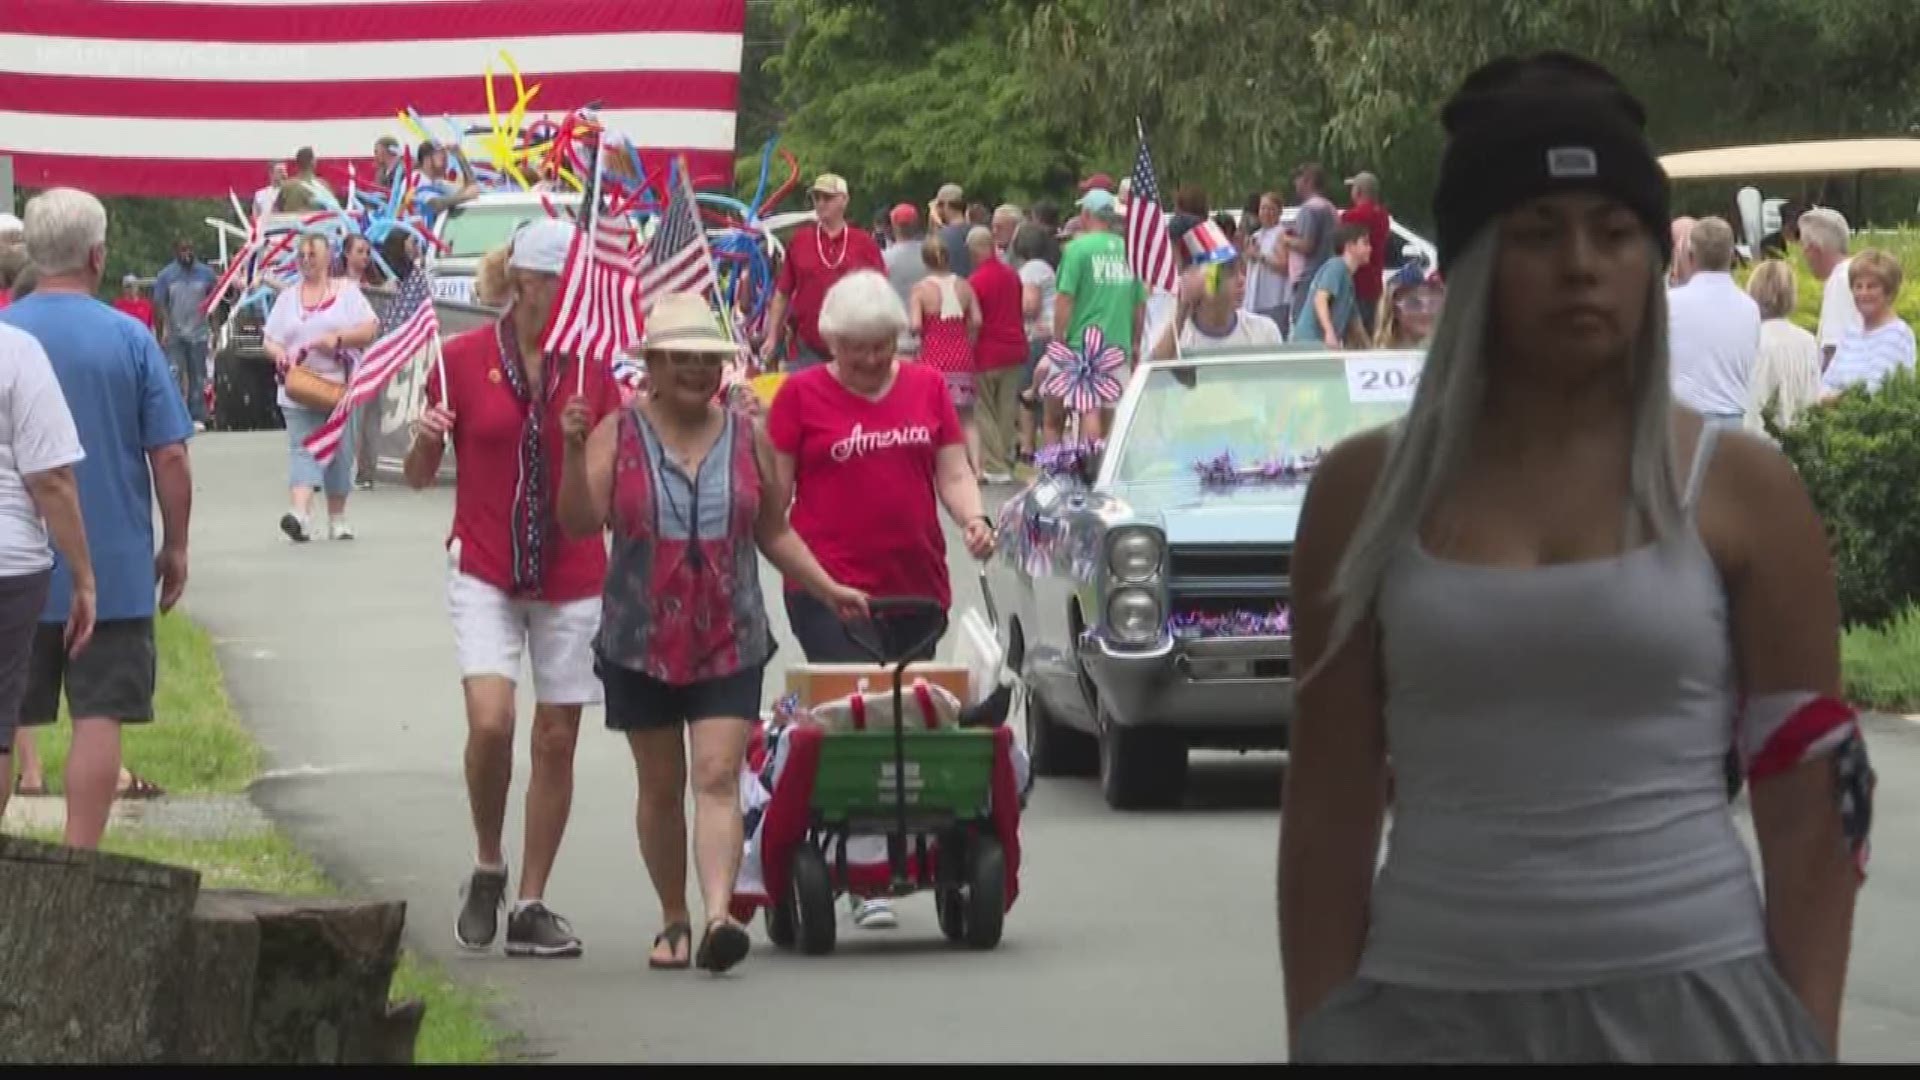 For decades, one Greensboro neighborhood has celebrated Independence Day with its own parade and block party.